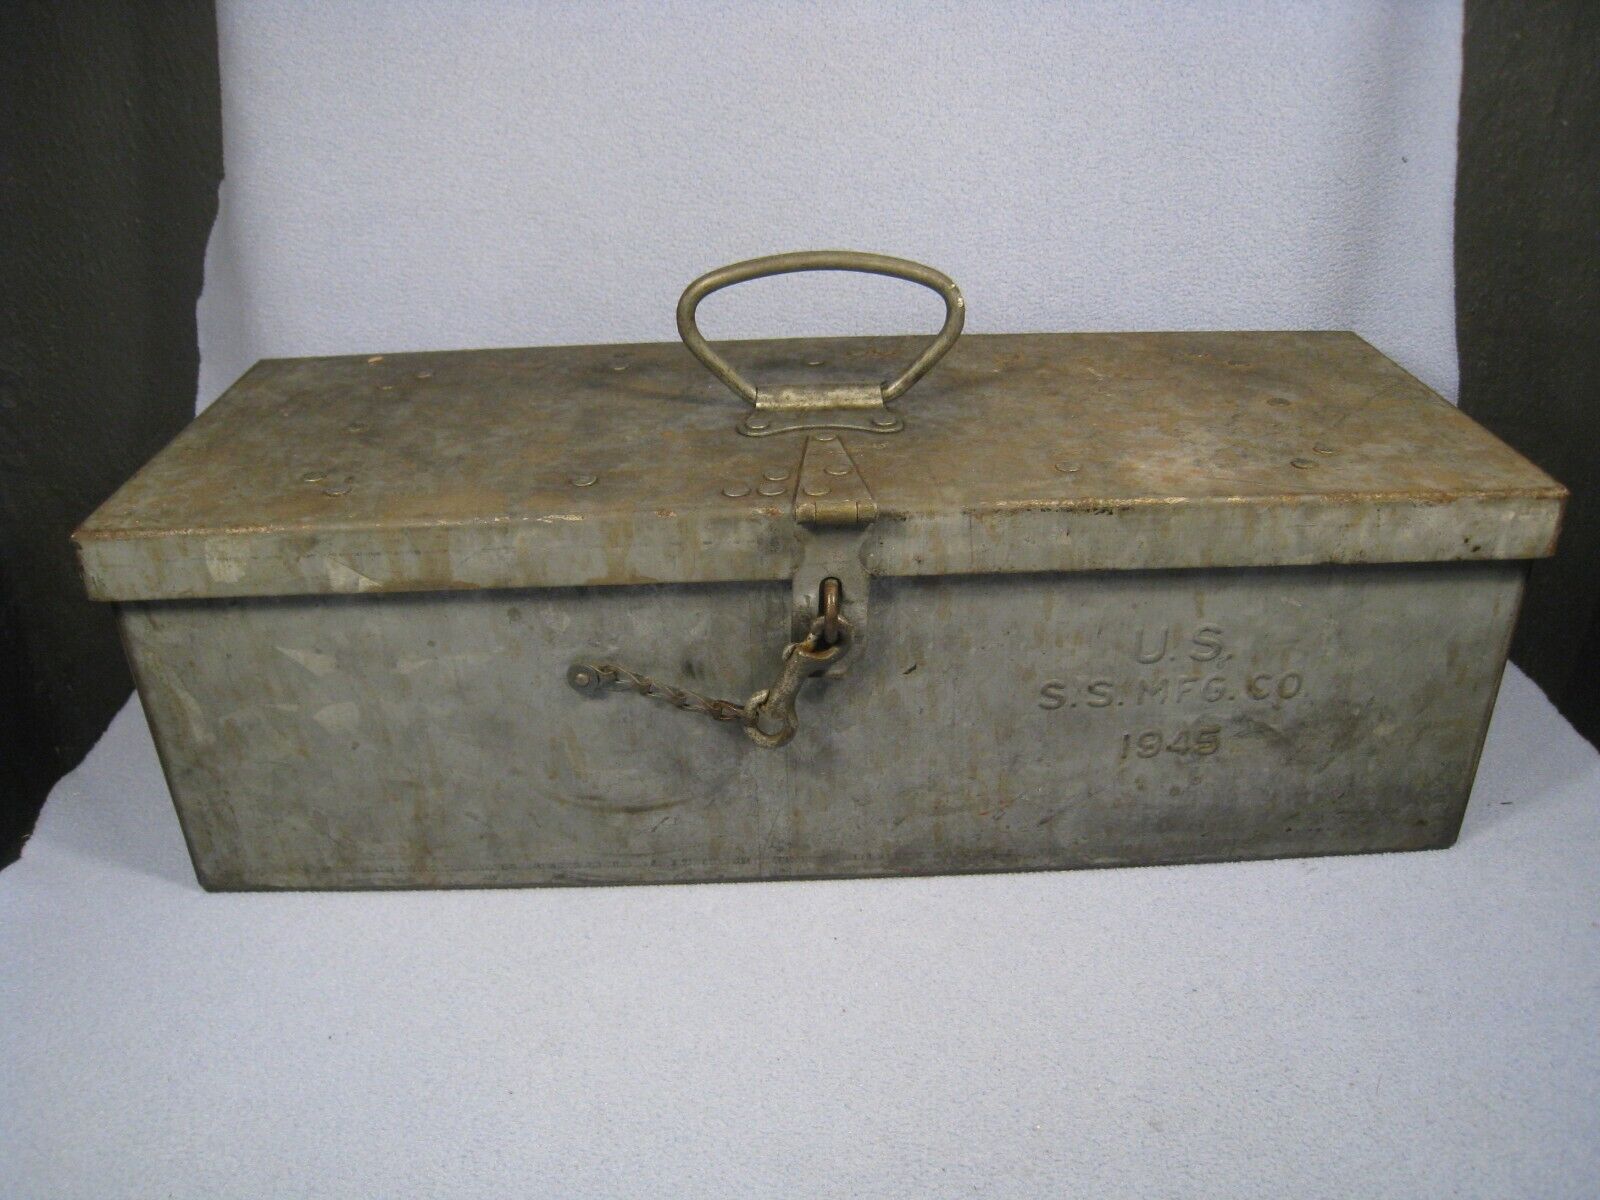 Vintage Metal WW2 1945 US. Navy Ship Issue S.S. MFG. Co. Riveted Tool Box